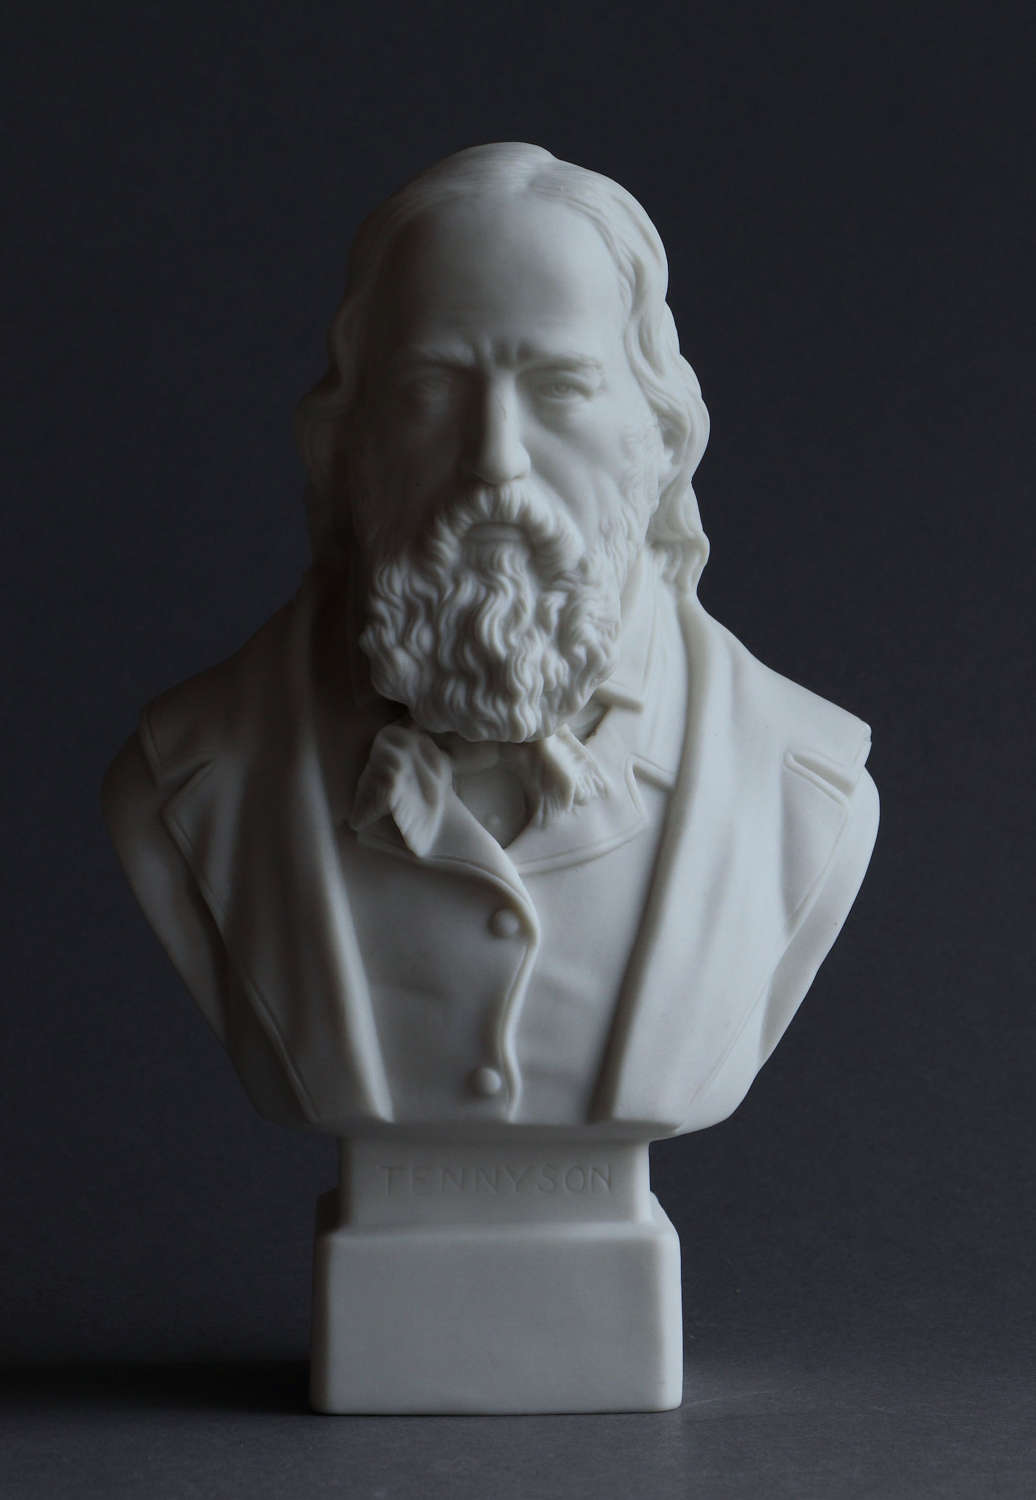 A small Parian bust of  Lord Tennyson by Robinson & Leadbeater